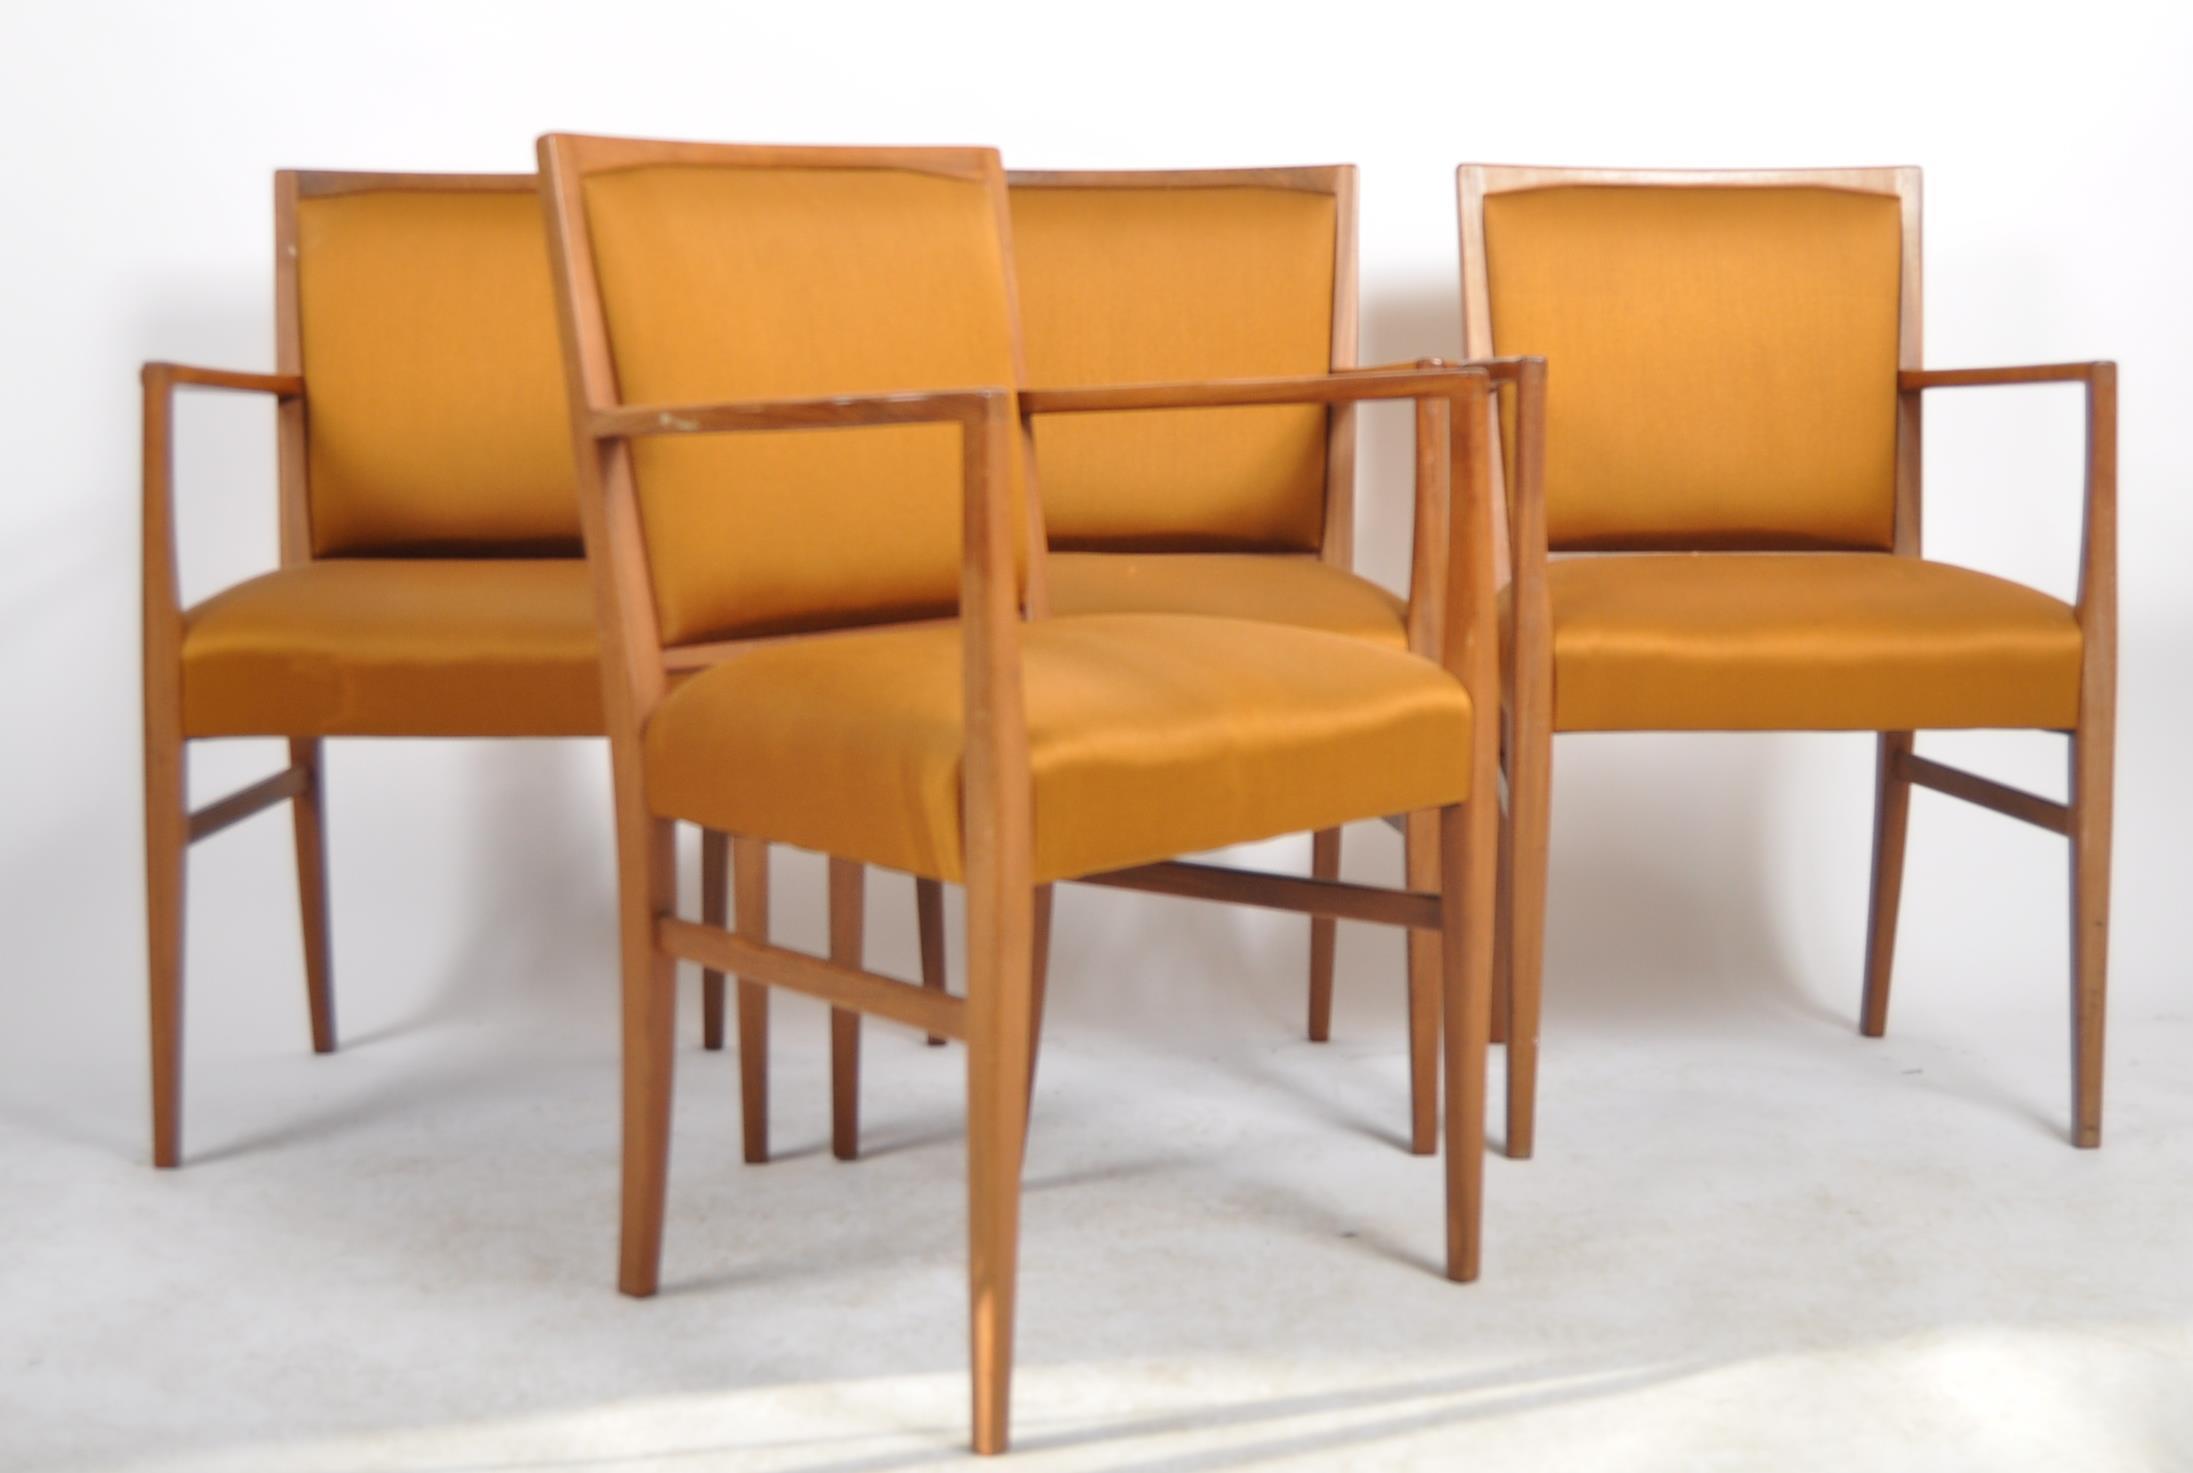 GORDON RUSSELL - MATCHING SET OF 16 TEAK FRAMED CHAIRS - Image 6 of 13